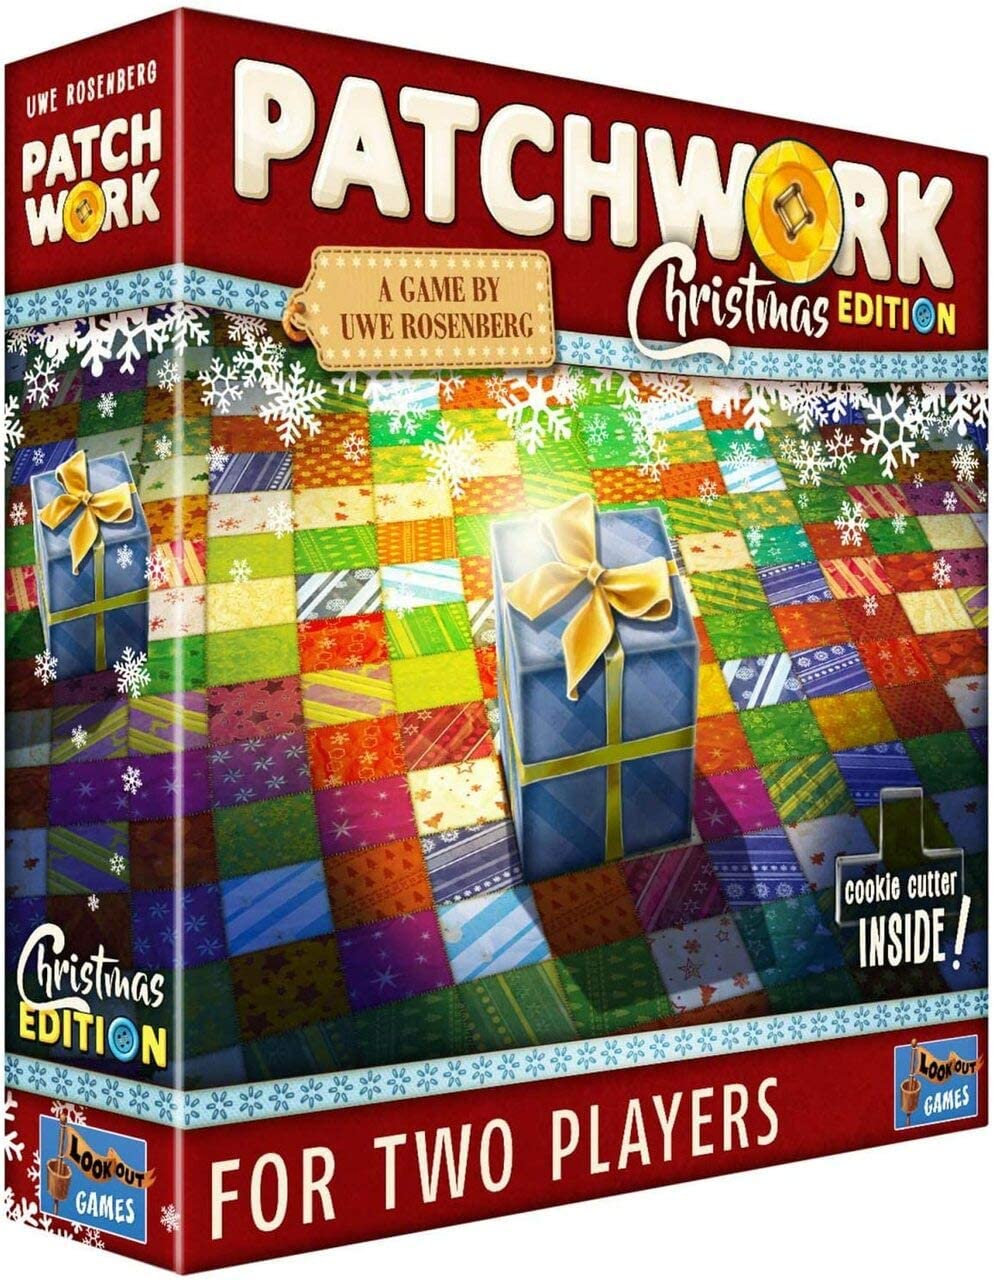 Patchwork: Christmas Edition | L.A. Mood Comics and Games